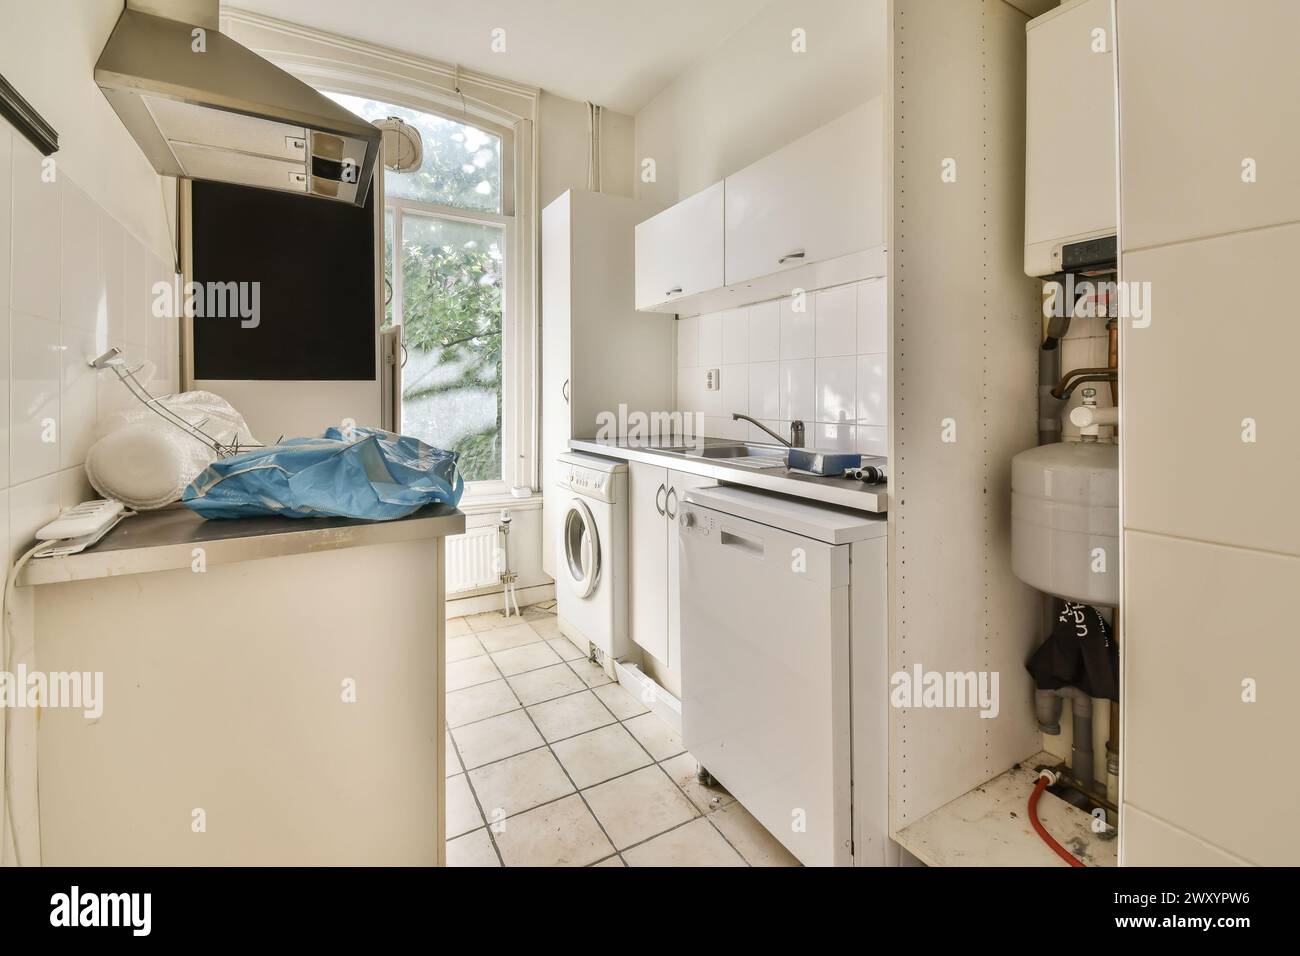 An image of a small, cluttered urban kitchen featuring basic appliances, a window, and tiled flooring. Stock Photo